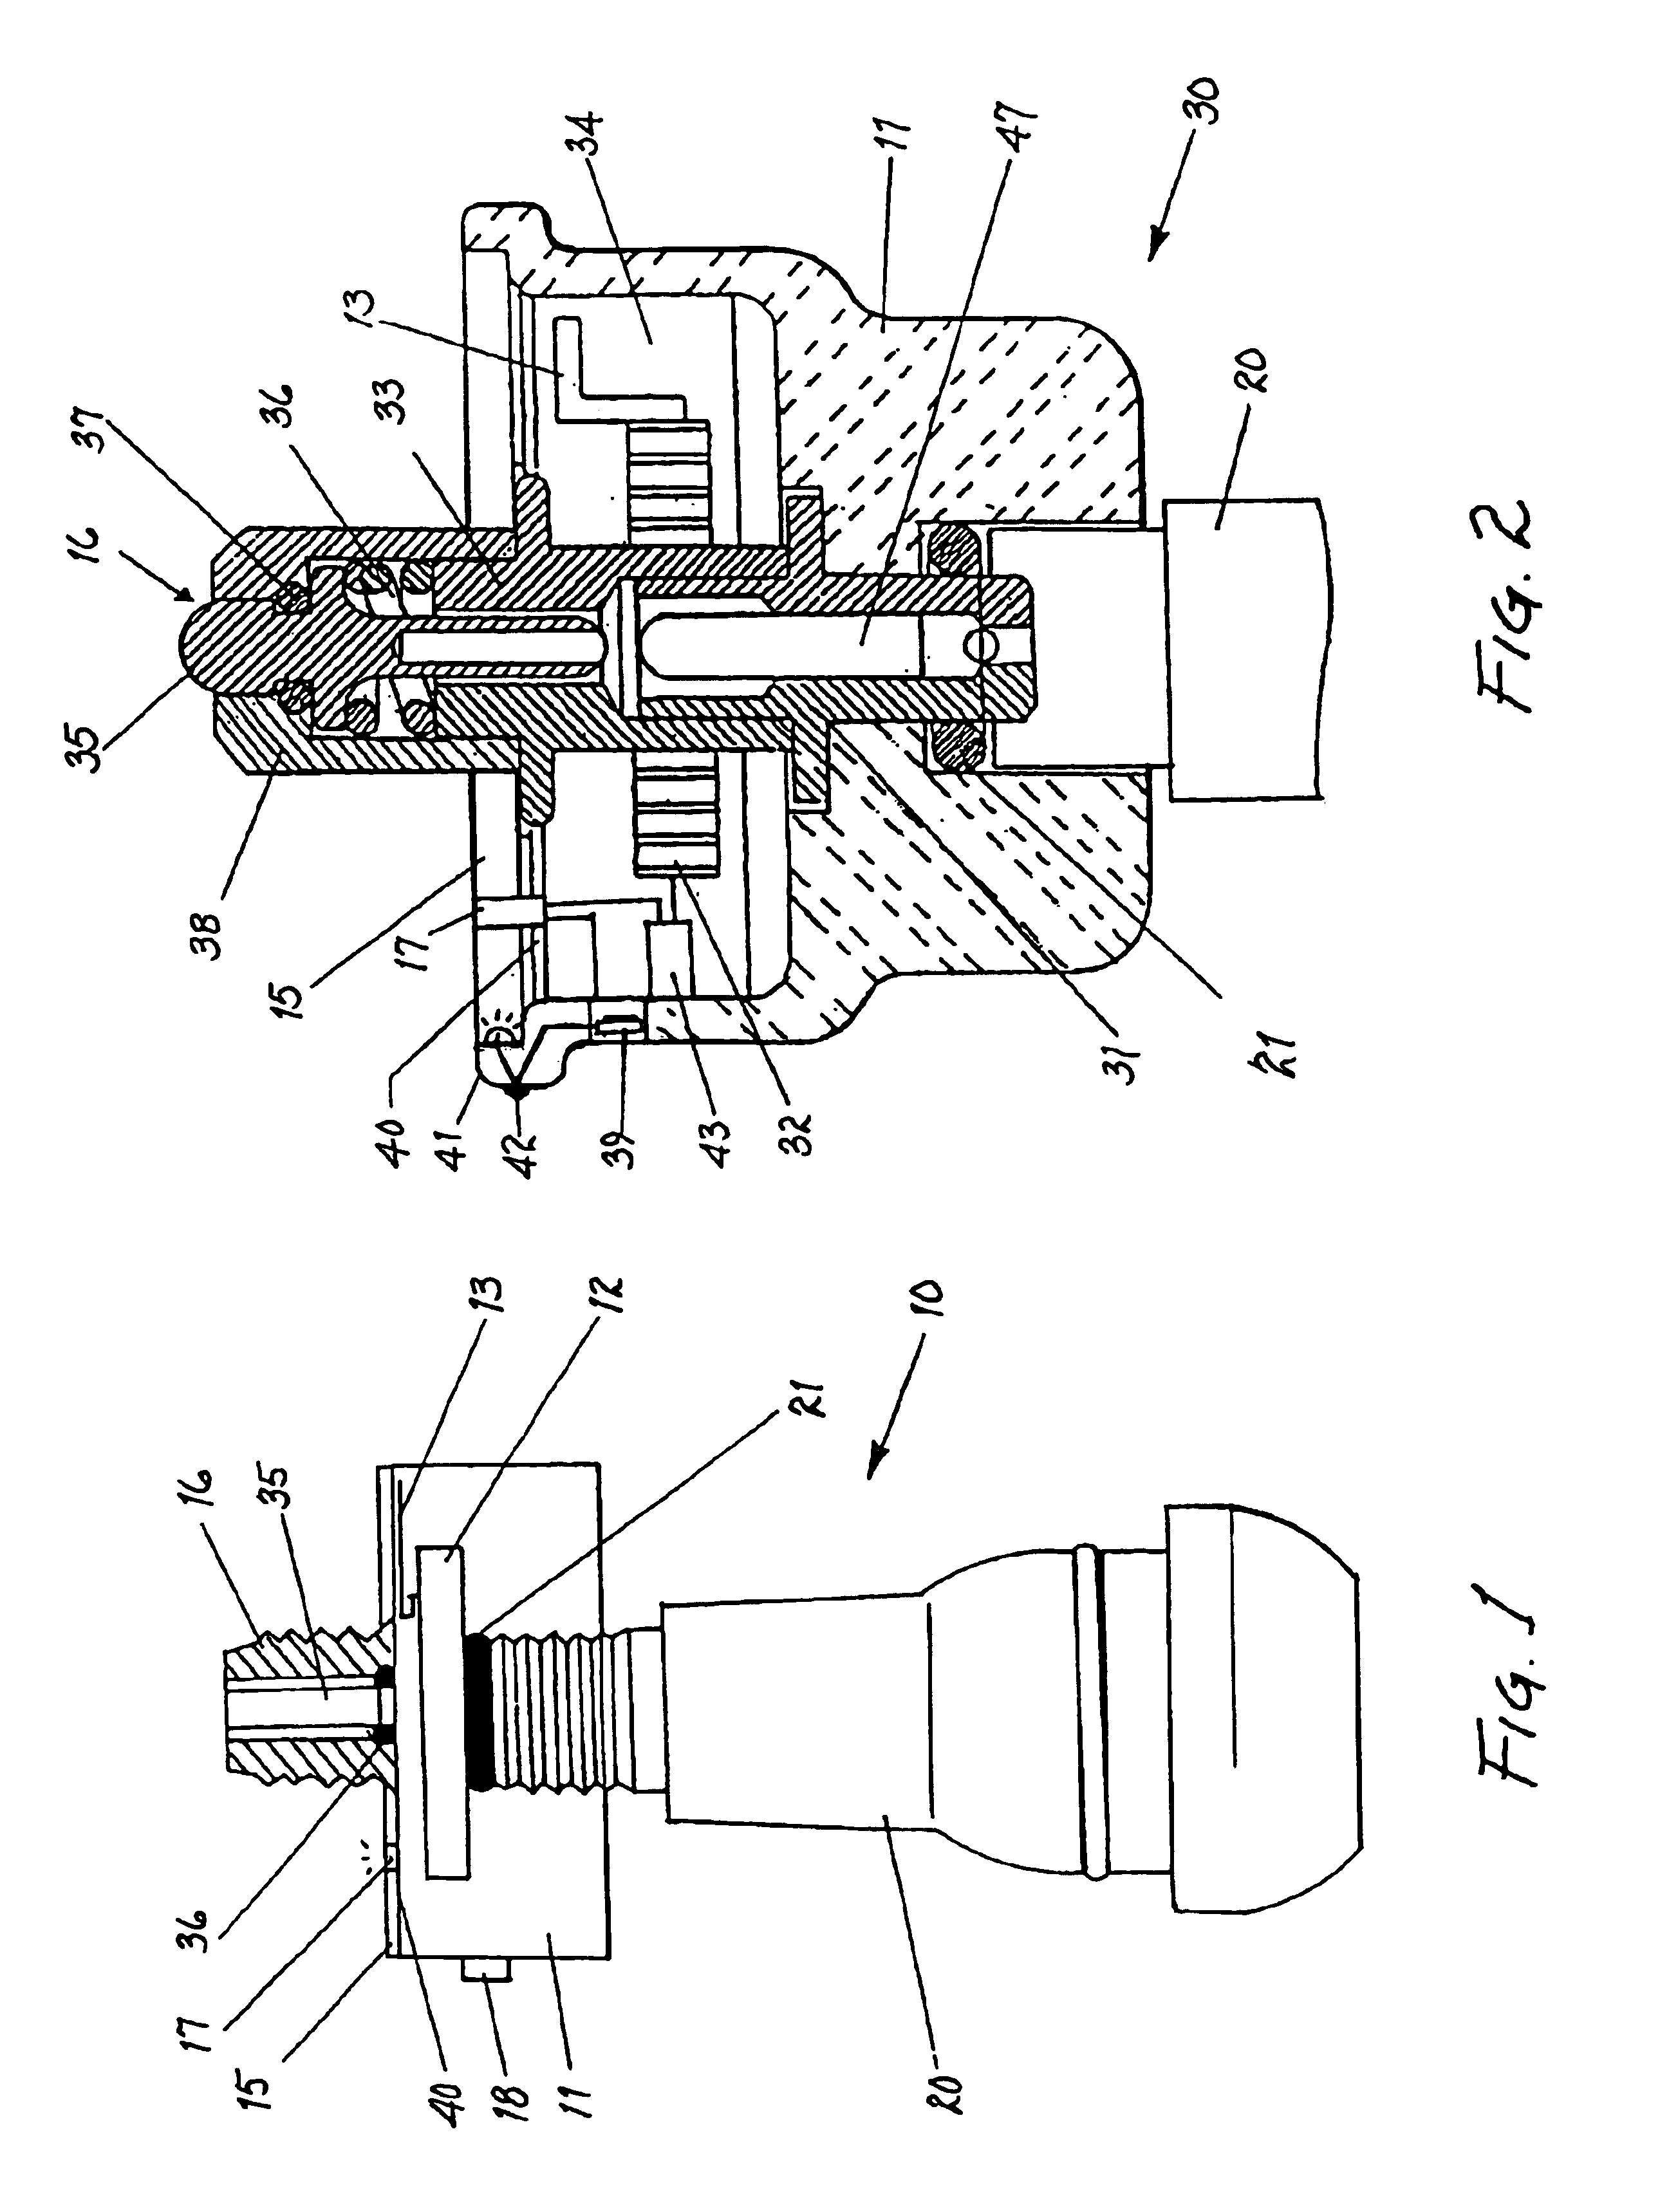 Air pressure gauge assembly for continuous monitoring of tire inflation pressure